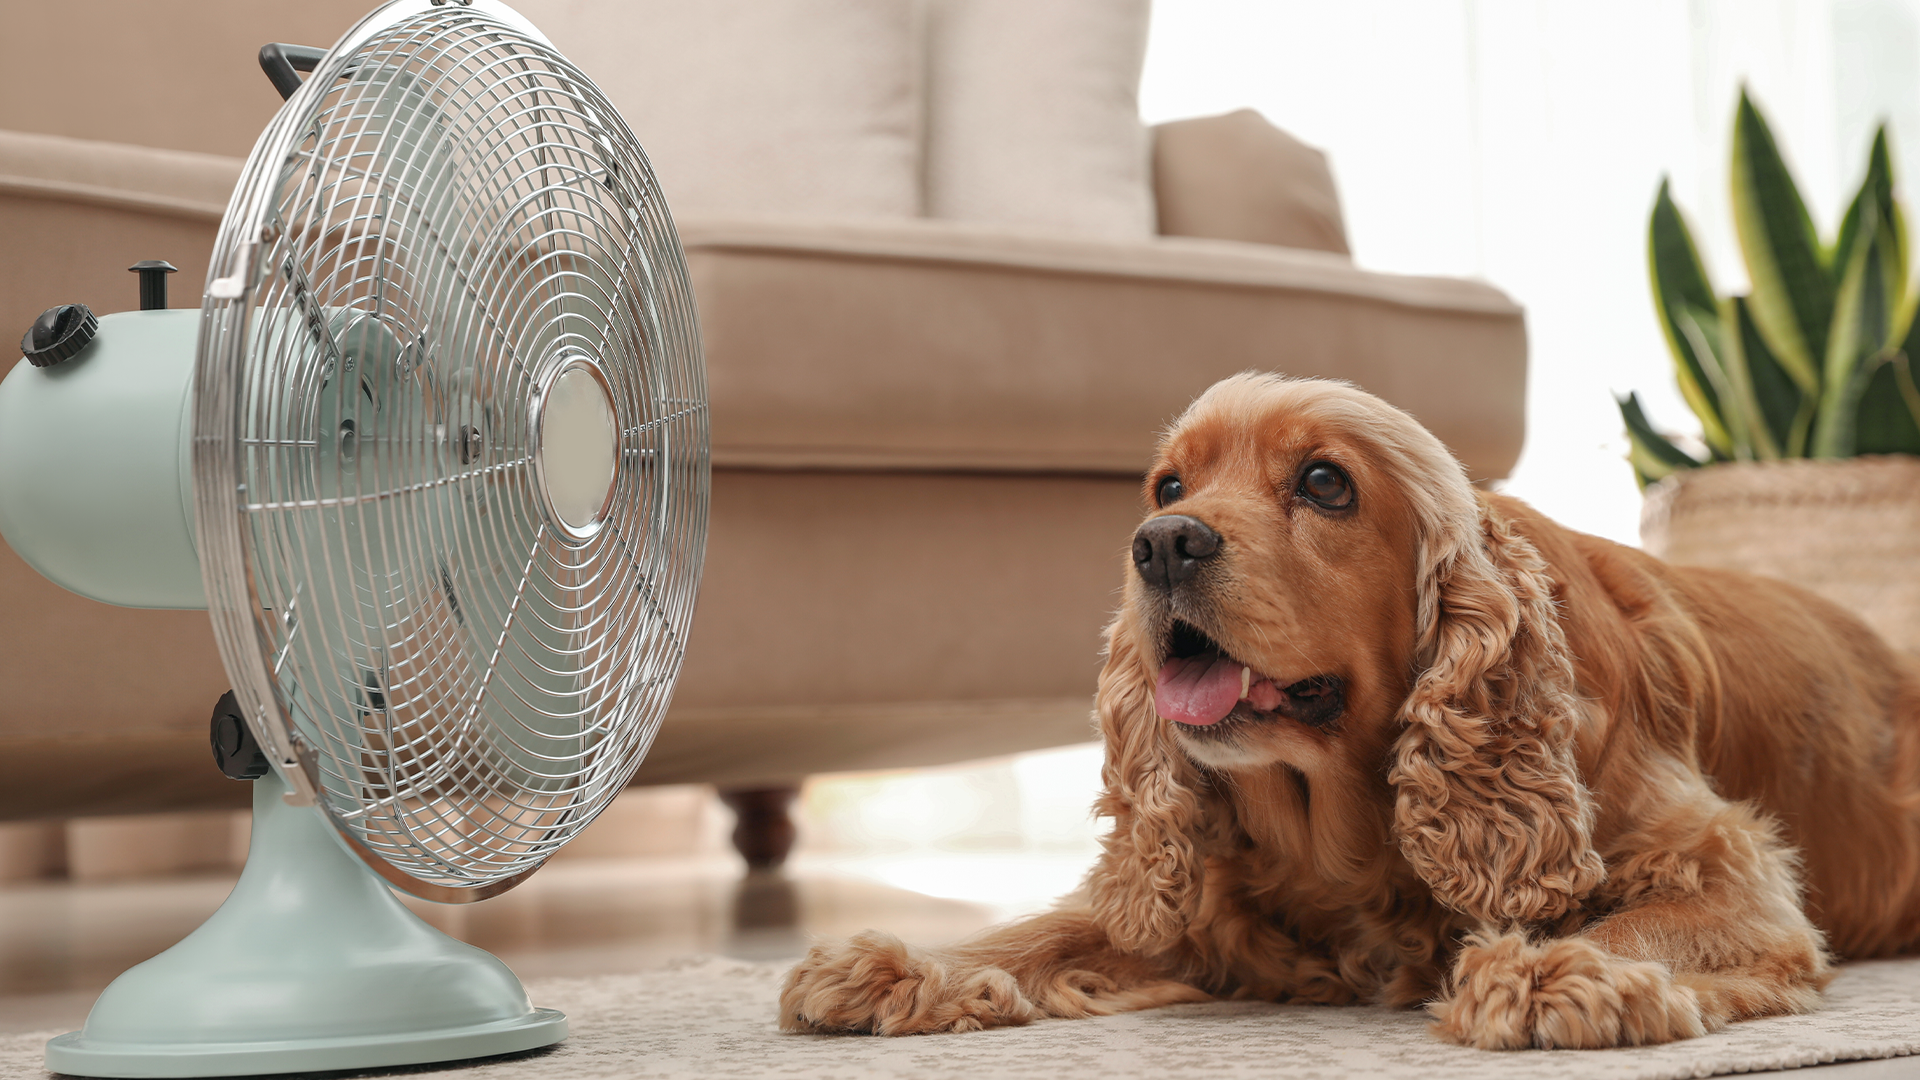 With the weather getting warmer, it's important to understand how to keep your pups cool. Dogs are more prone to heat exhaustion and heat stroke because their fur coats don't provide the same level of protection as human skin does from the sun. Read this